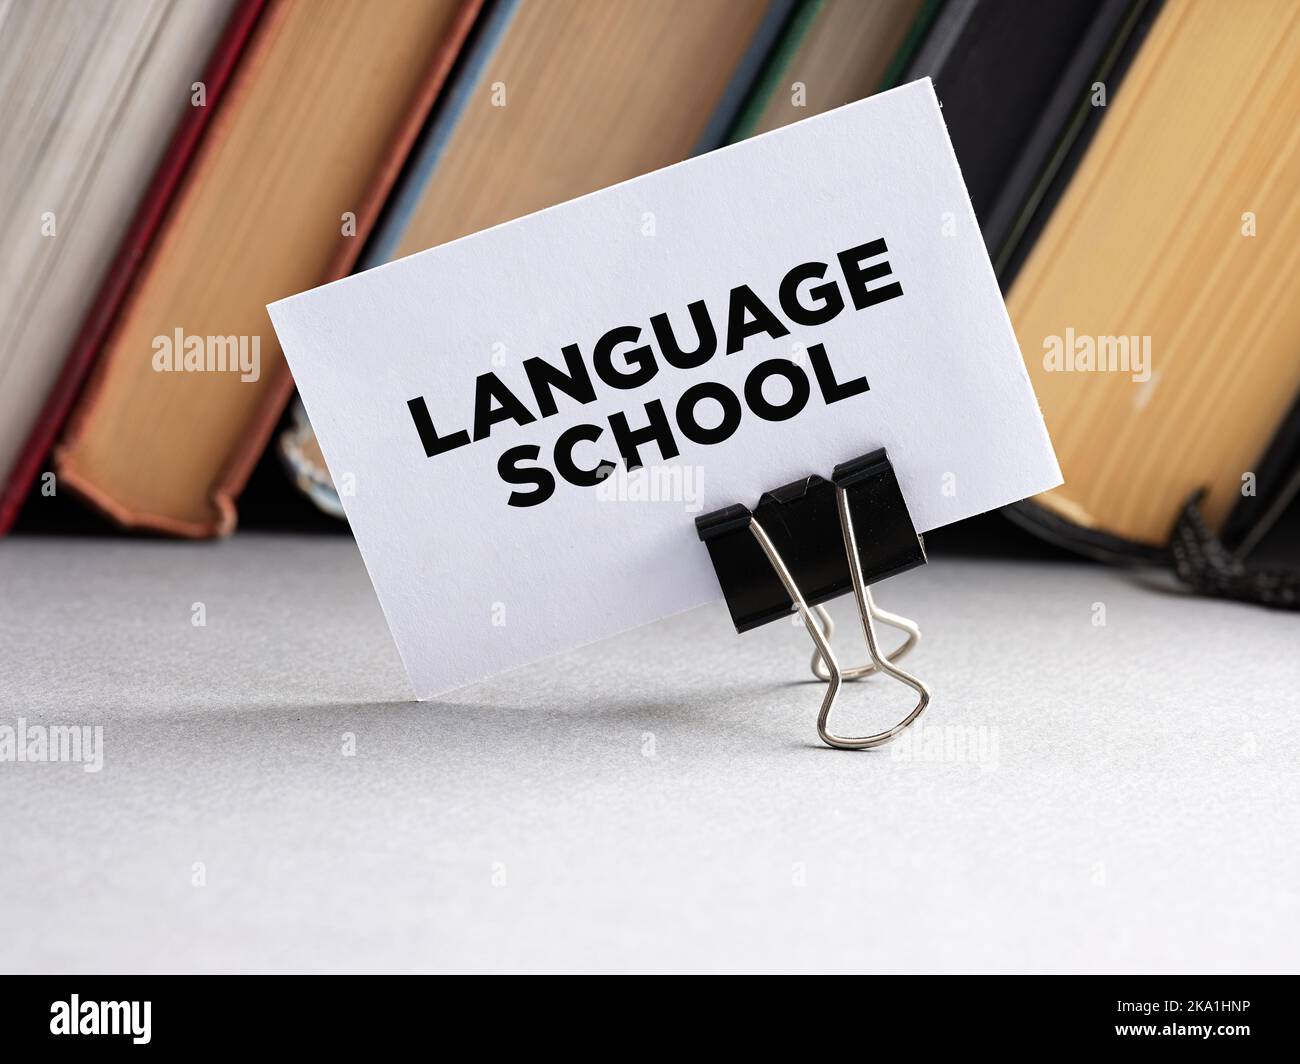 The word language school written on a business card with books background. Foreign language education concept. Stock Photo